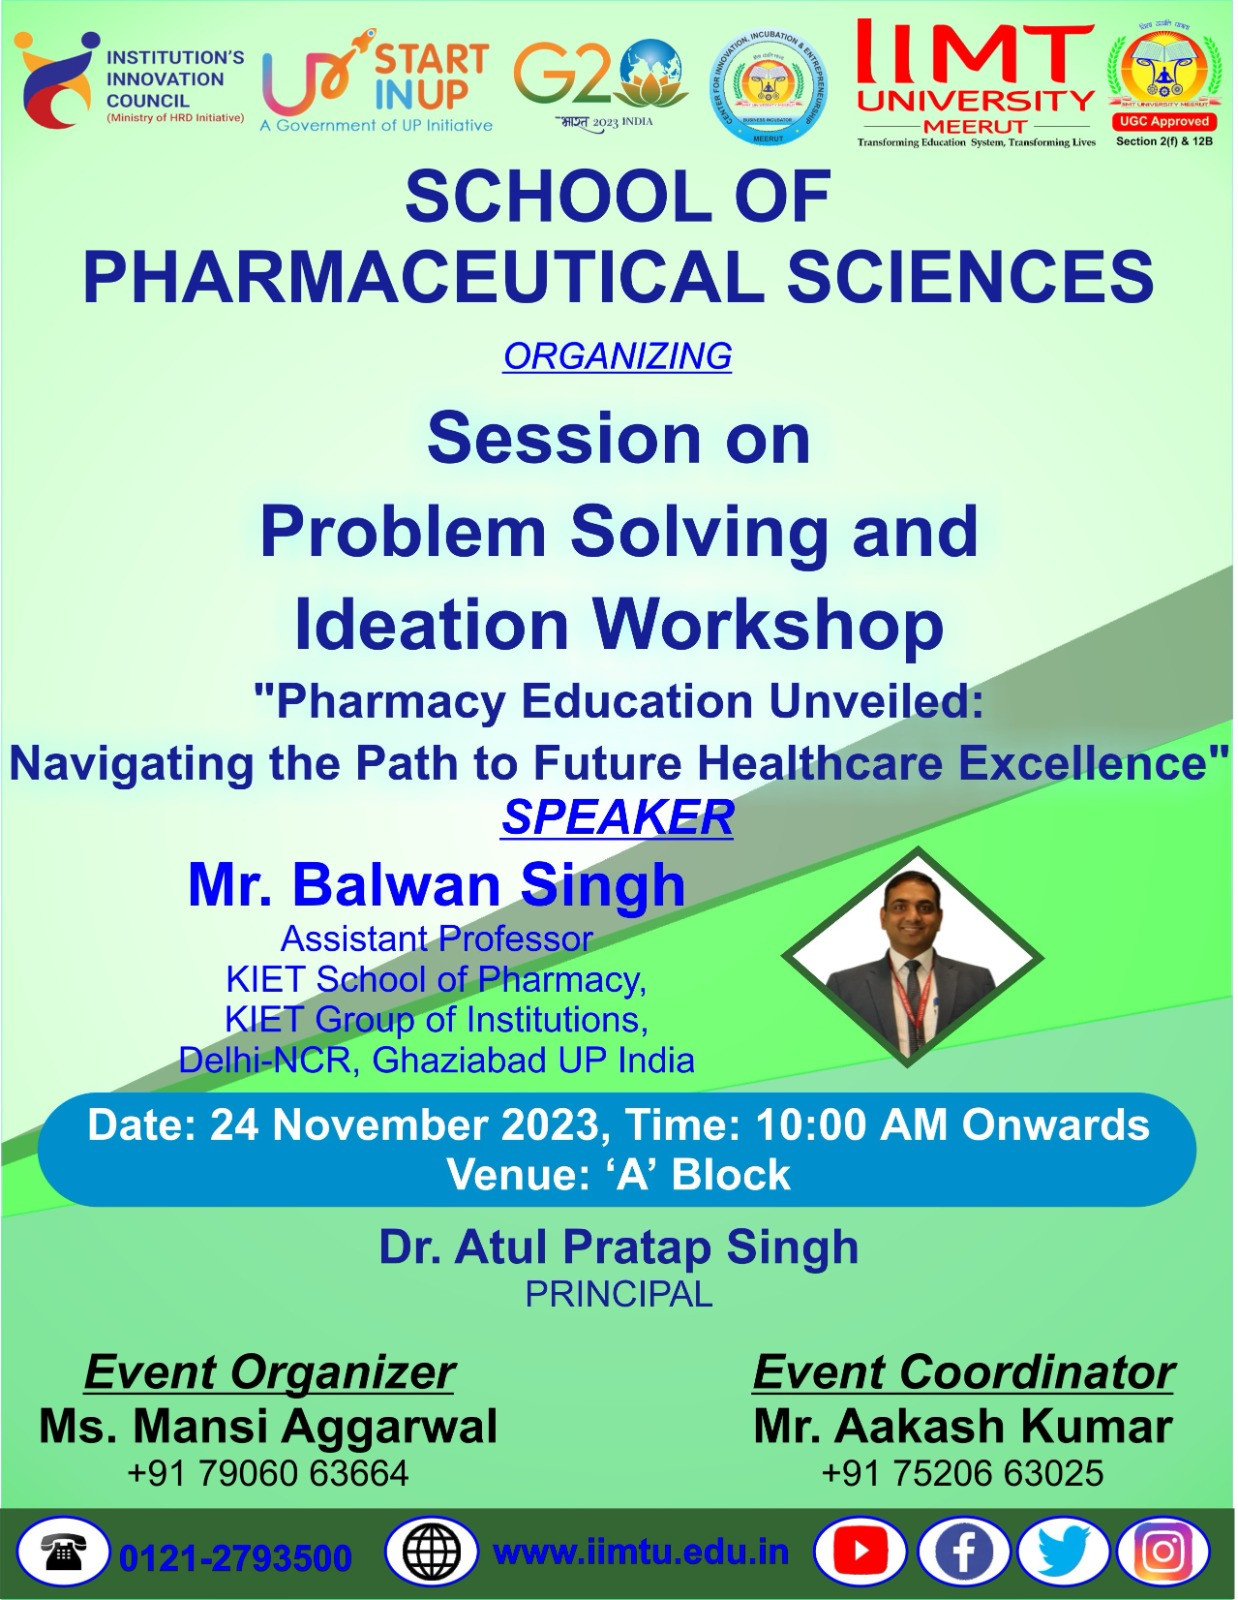 Seminar on Problem Solving and Ideation Workshop. “Pharmacy Education Unveiled: Navigating the Path to Future Healthcare Excellence”